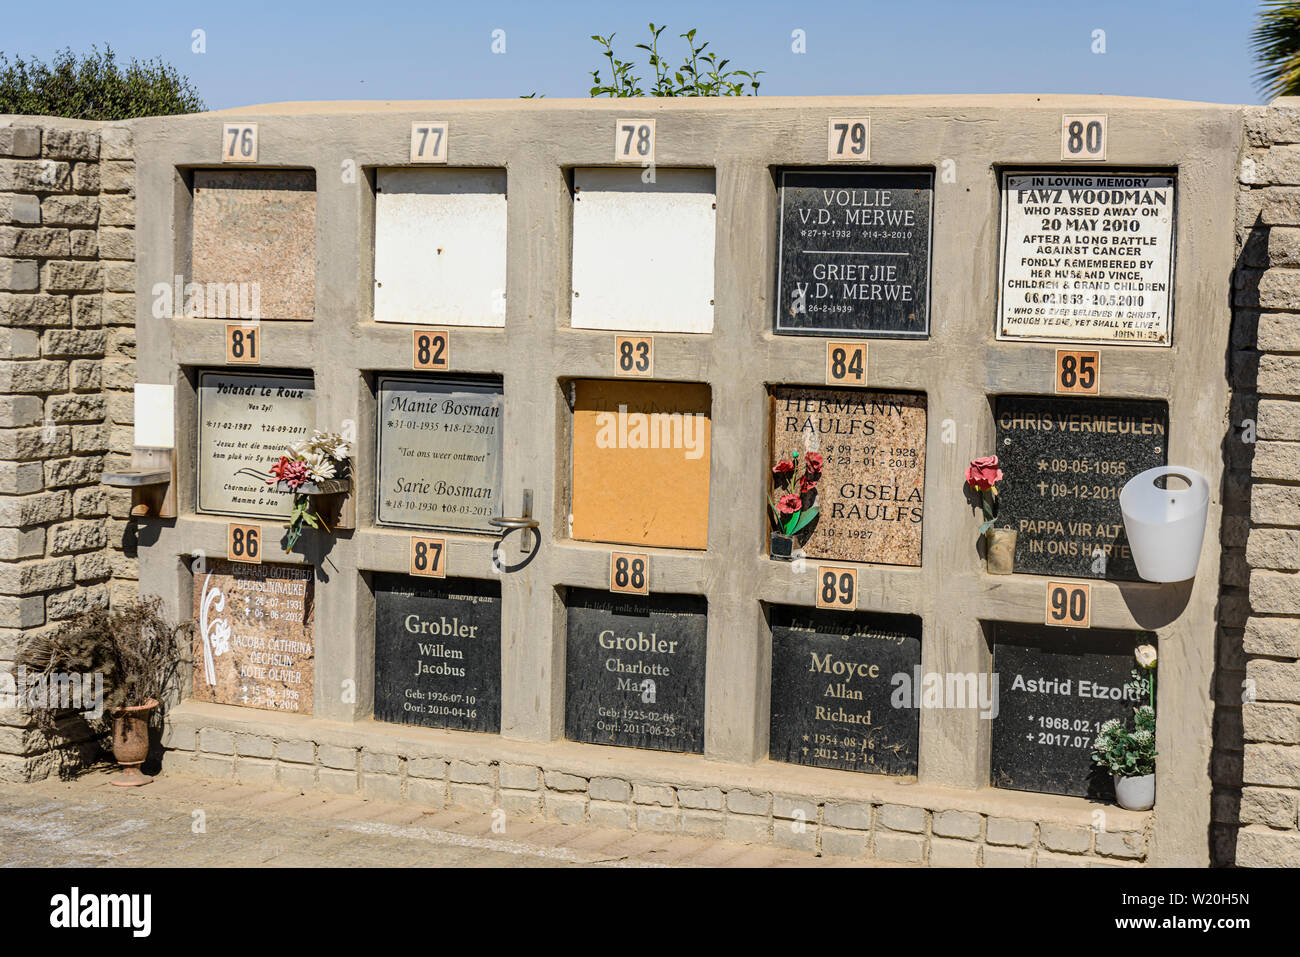 Numbered holes for the internment of ashes in a German graveyard, Namibia Stock Photo